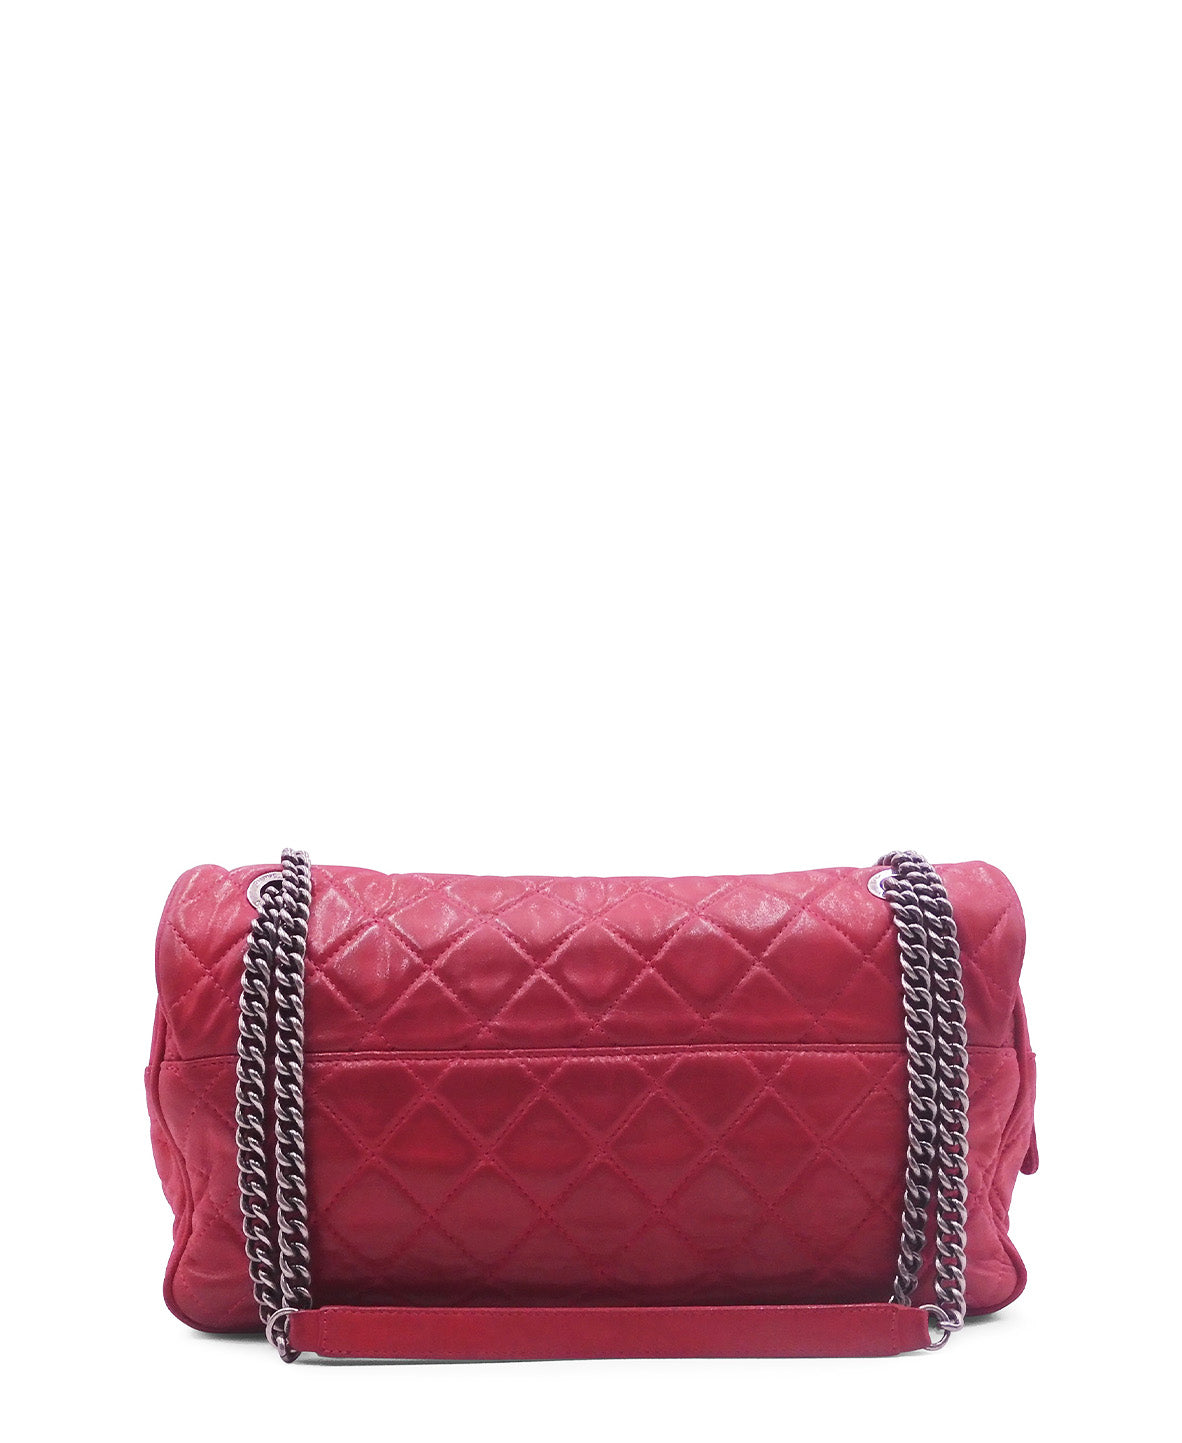 Buy Authentic, Preloved Chanel Paris-Bombay Large Shiva Flap Bag Pink Bags  from Second Edit by Style Theory